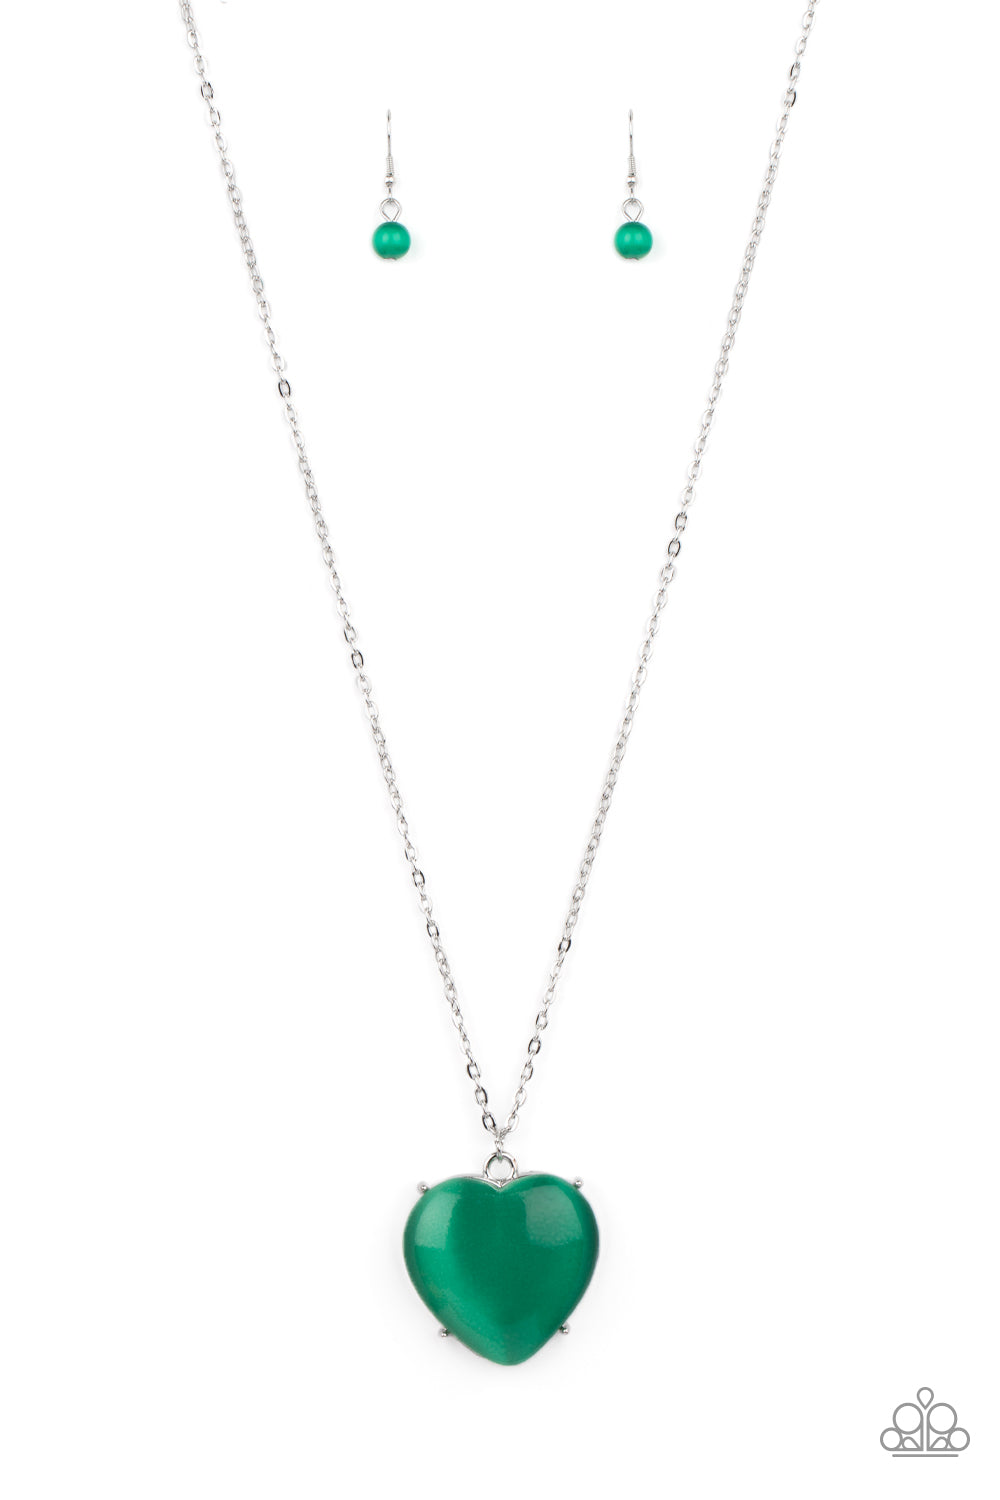 Warmhearted Glow - Green Necklaces oversized Mint cat's eye stone frame swings from the bottom of a lengthened silver chain, creating a flirtatious pendant. Features an adjustable clasp closure.  Sold as one individual necklace. Includes one pair of matching earrings.  Paparazzi Jewelry is lead and nickel free so it's perfect for sensitive skin too!